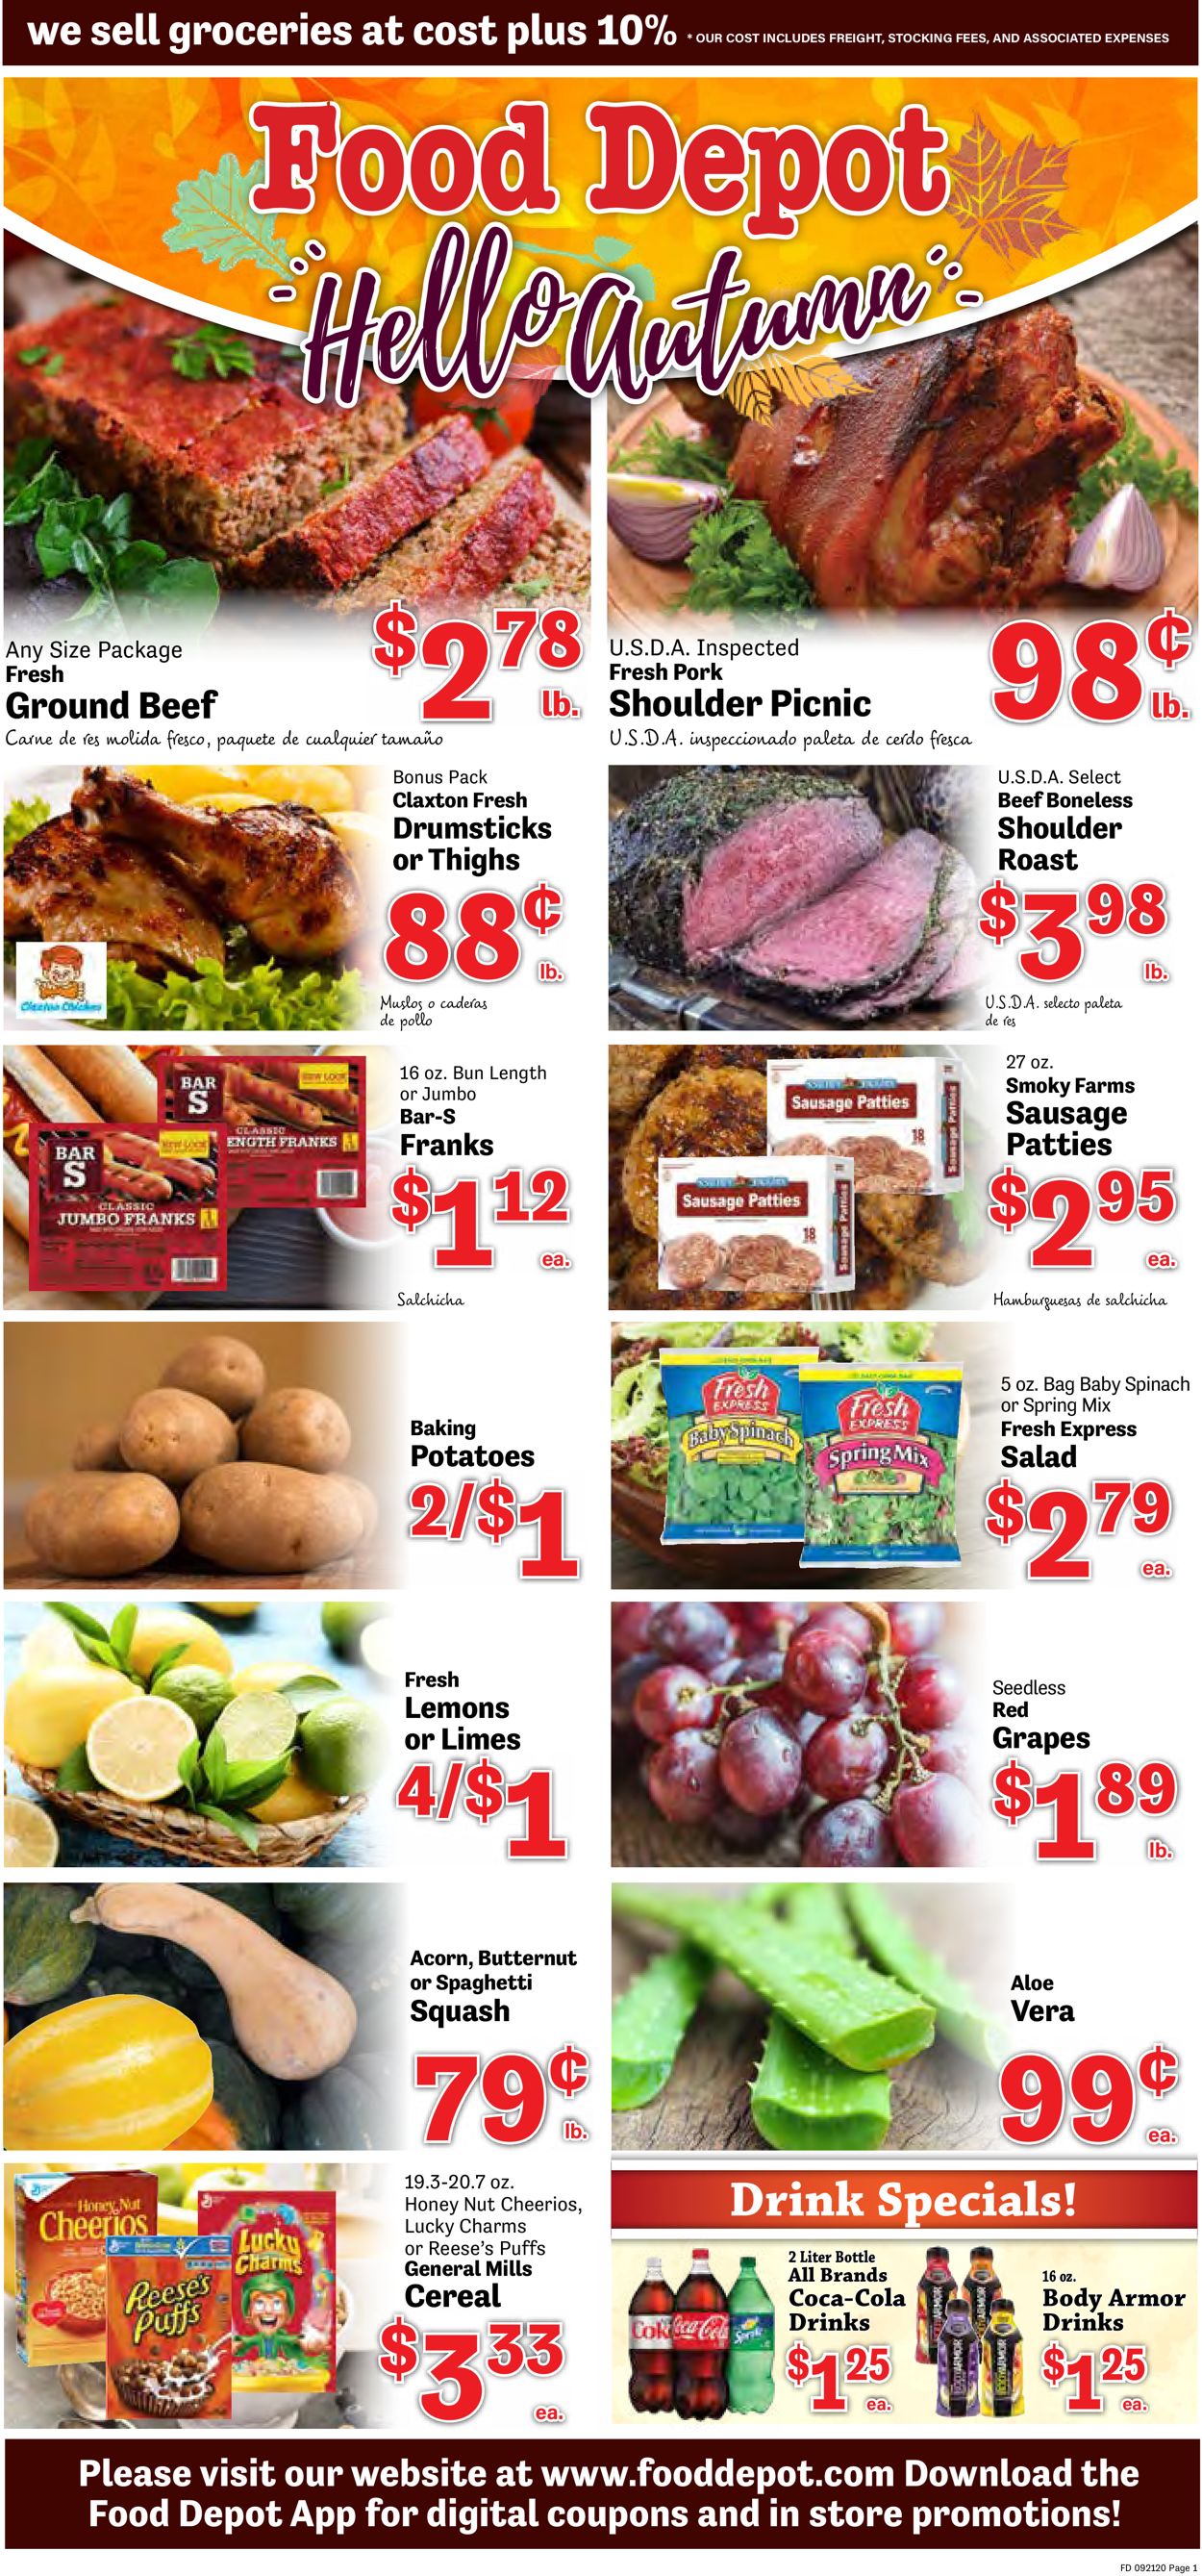 Food Depot Current weekly ad 09/21 09/27/2020 frequent ads com